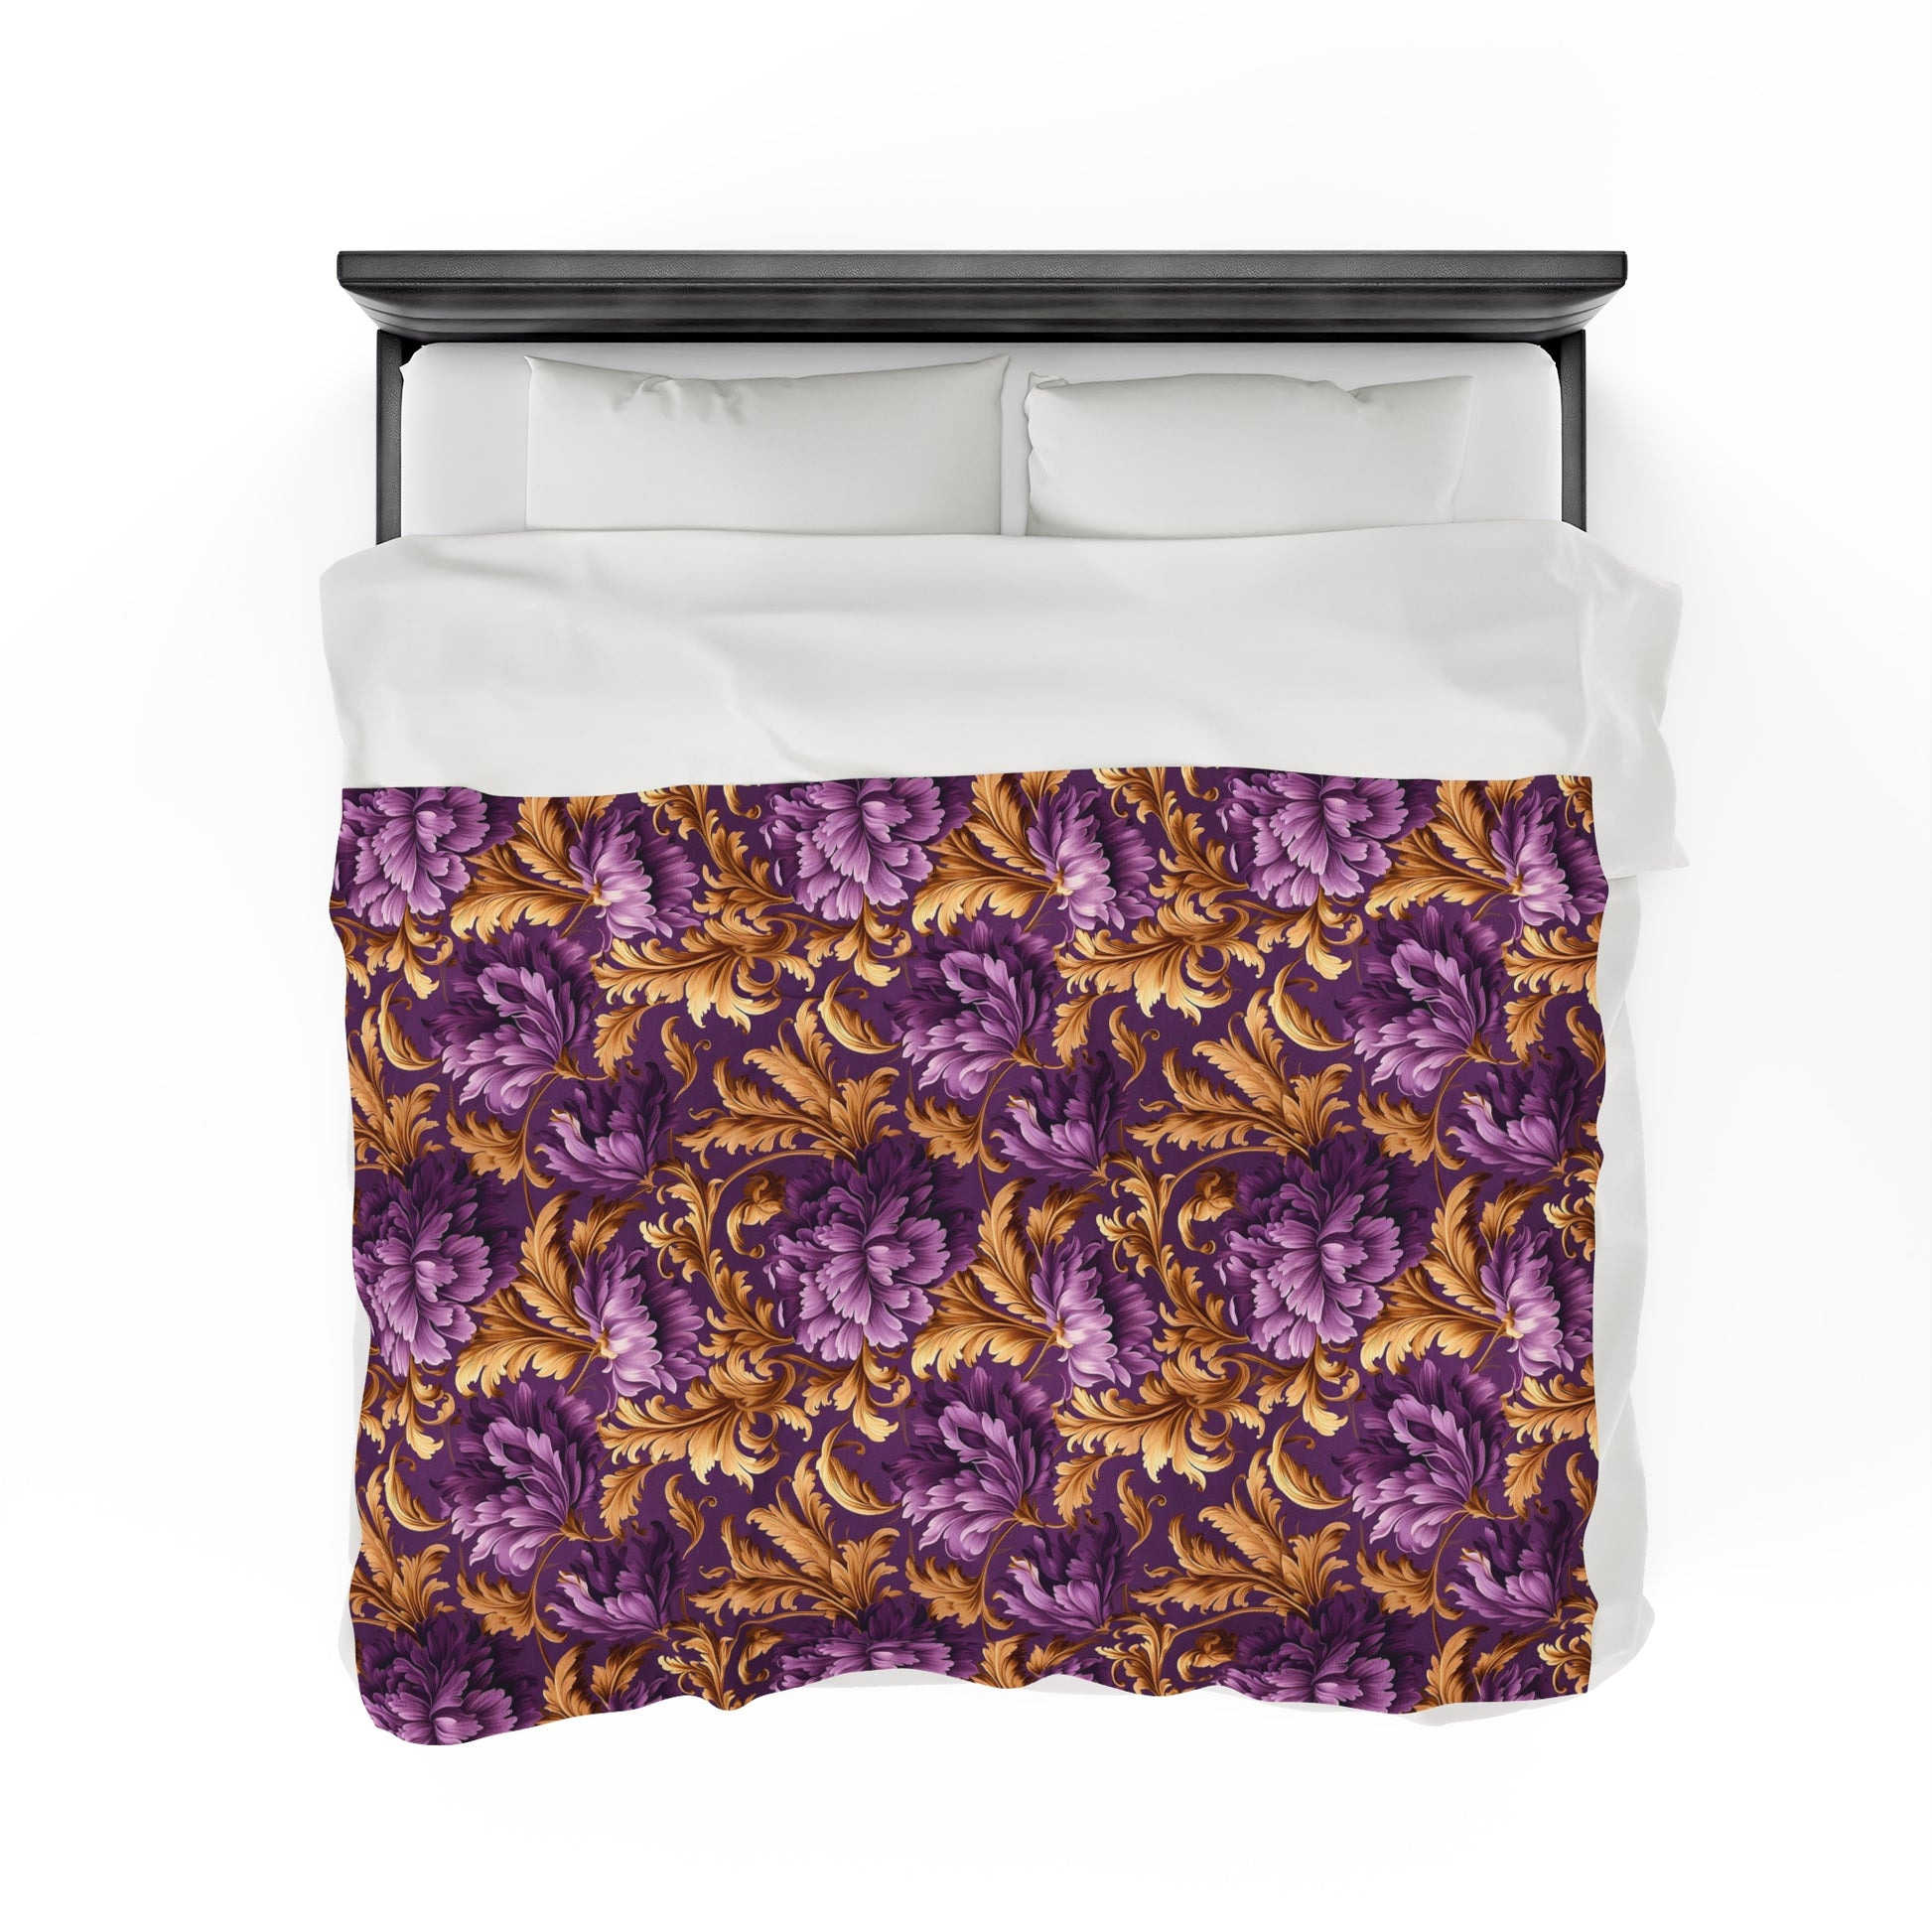 Velveteen Plush Blanket | Gold and Purple Flowers | Sophisticated Throw Blanket from The Curated Goose